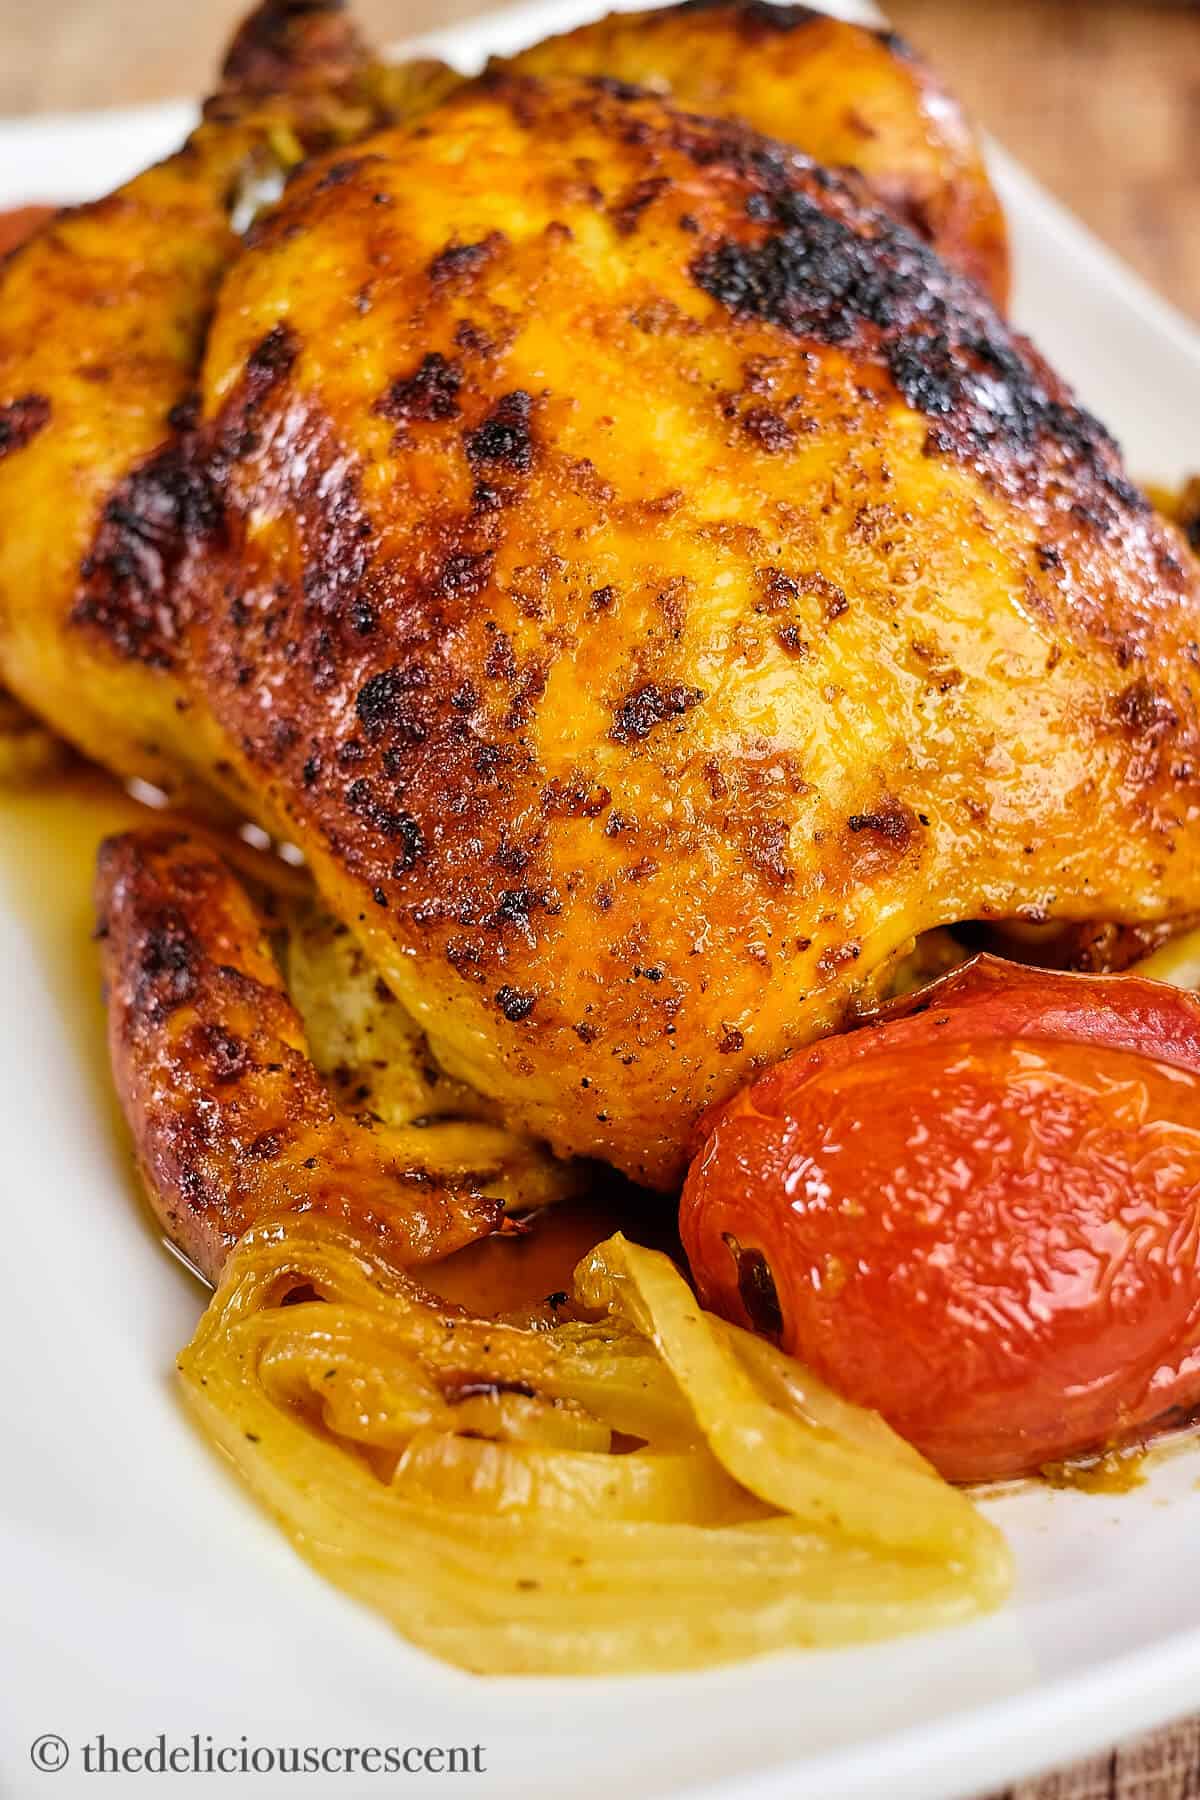 Saffron infused chicken roasted and served.